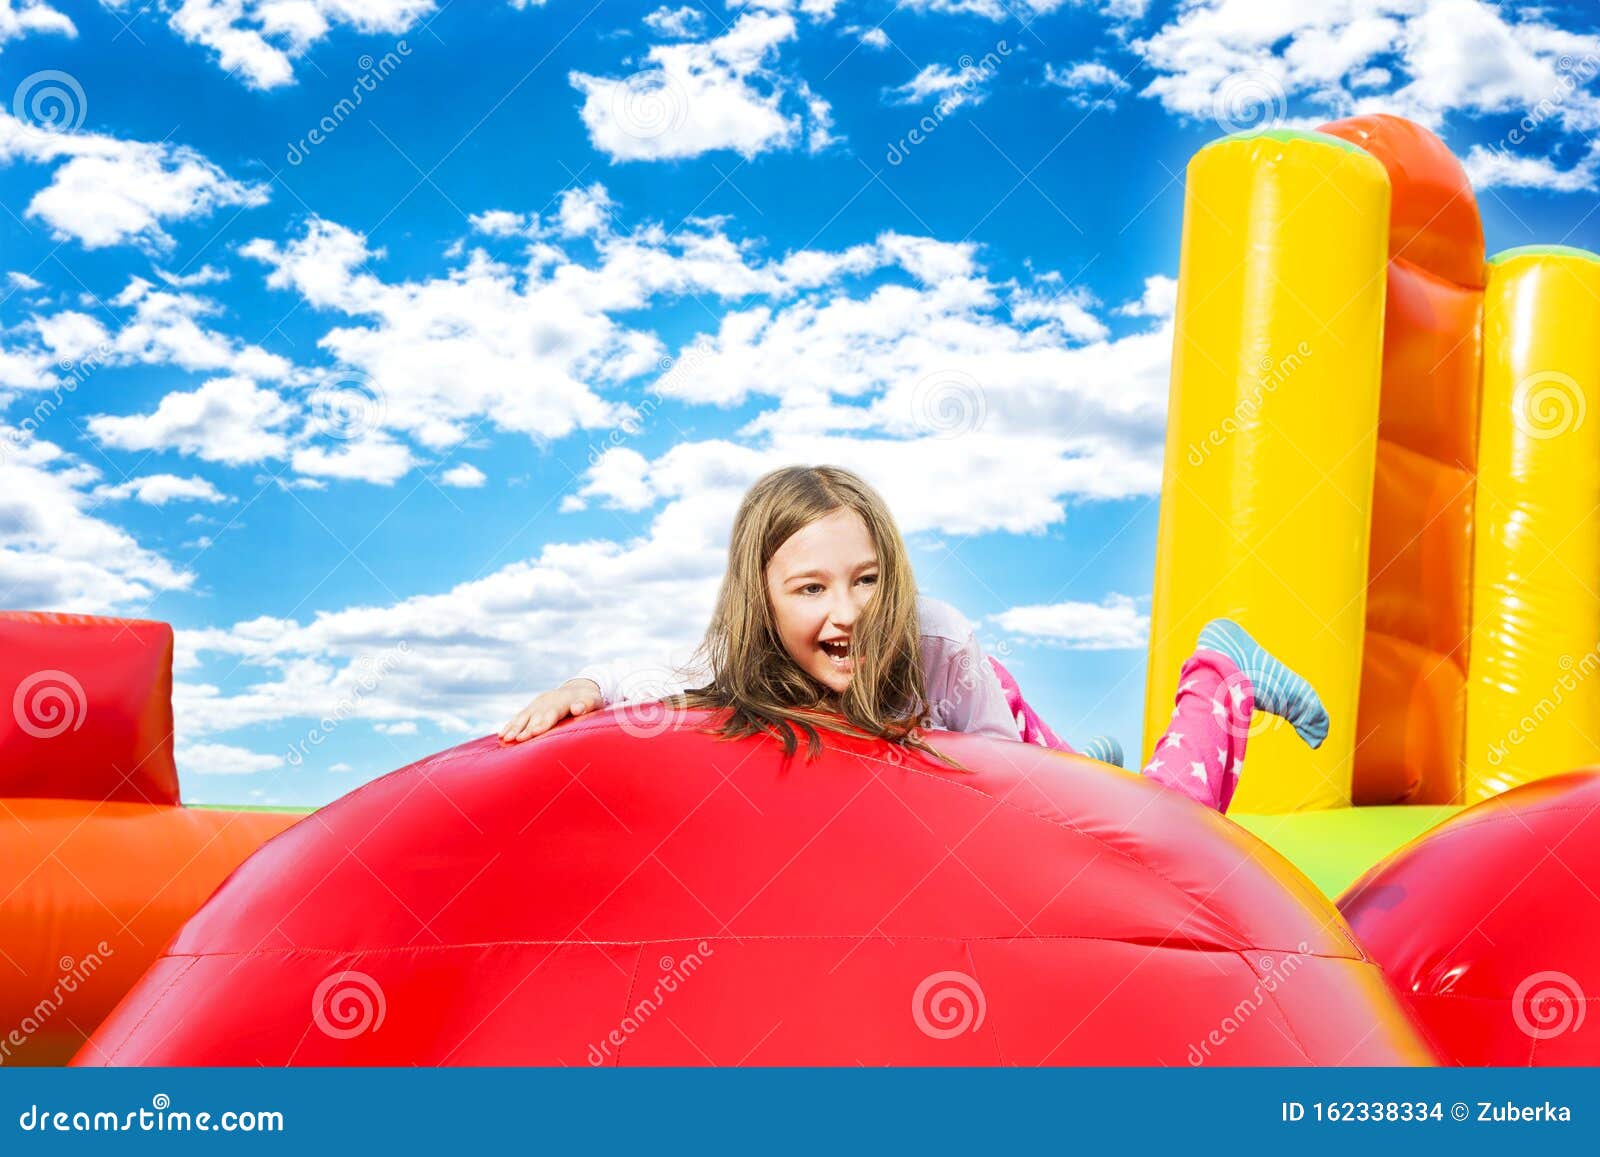 happy girl child on inflate castle cloudscape